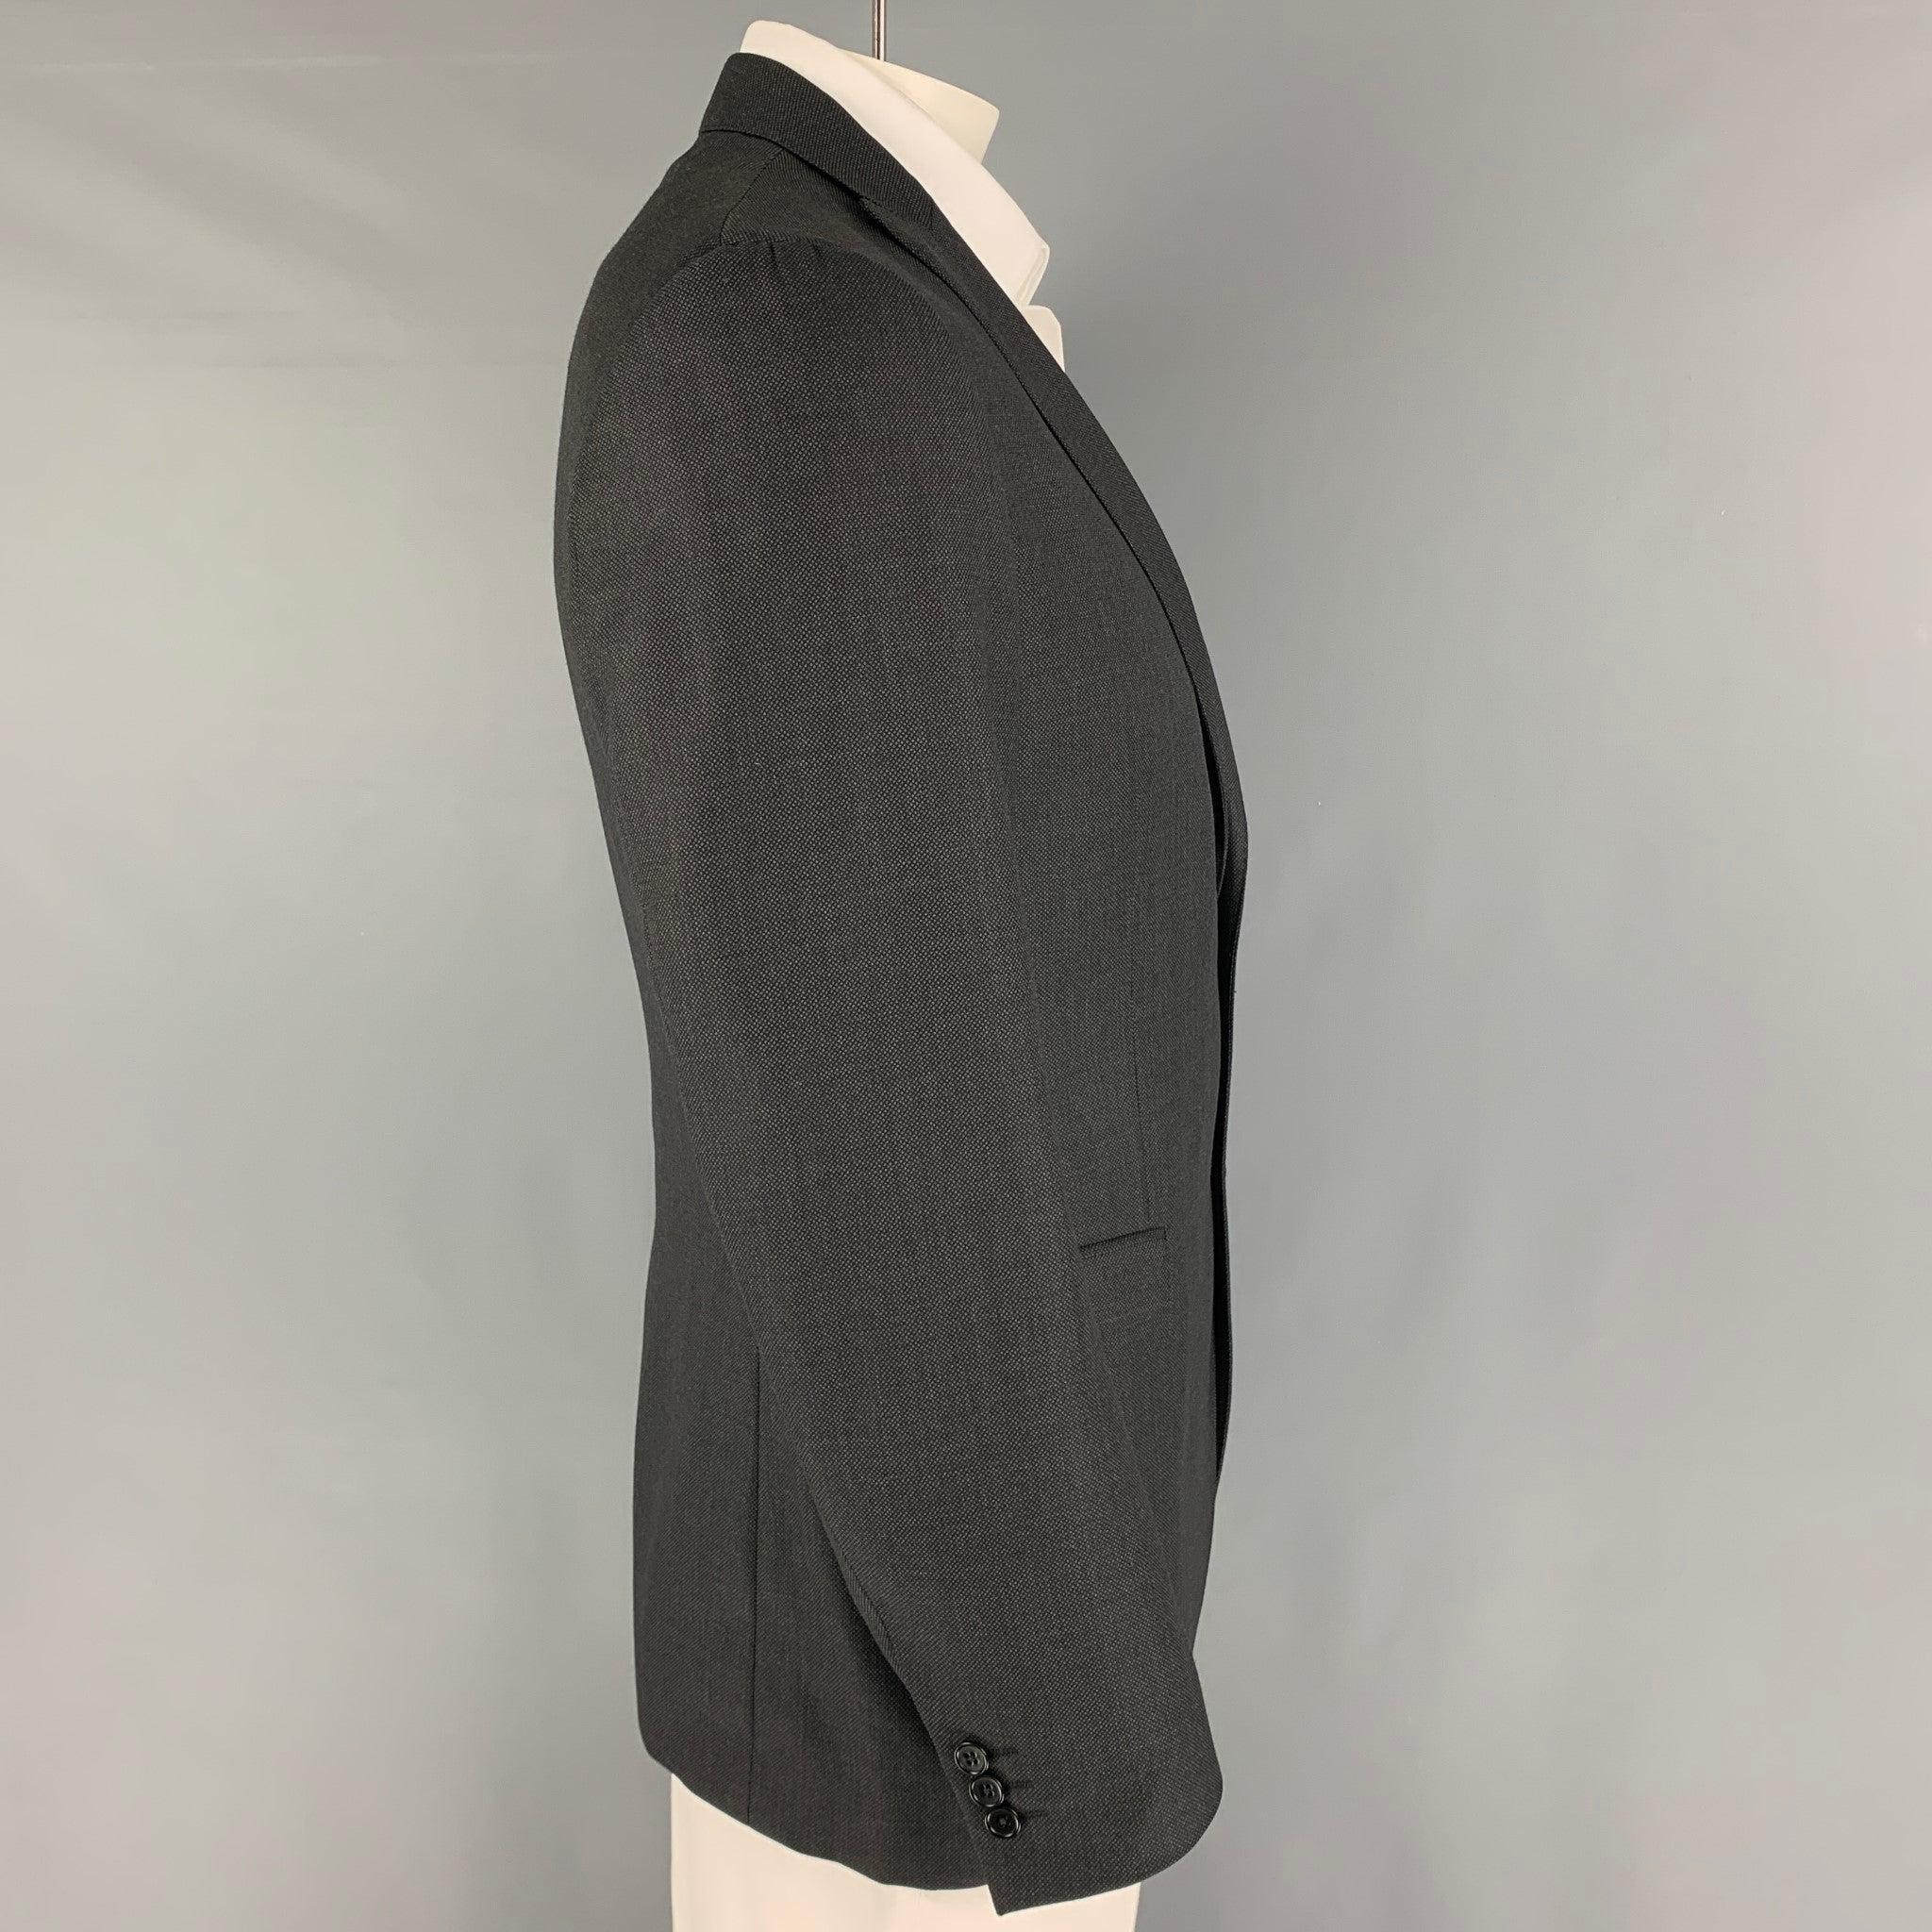 JOHN VARVATOS sport coat comes in a charcoal wool with a full liner featuring a peak lapel, flap pockets, single back vent, and a double button closure. Made in Italy.
Excellent
Pre-Owned Condition. 

Marked:   52 R  

Measurements: 
 
Shoulder: